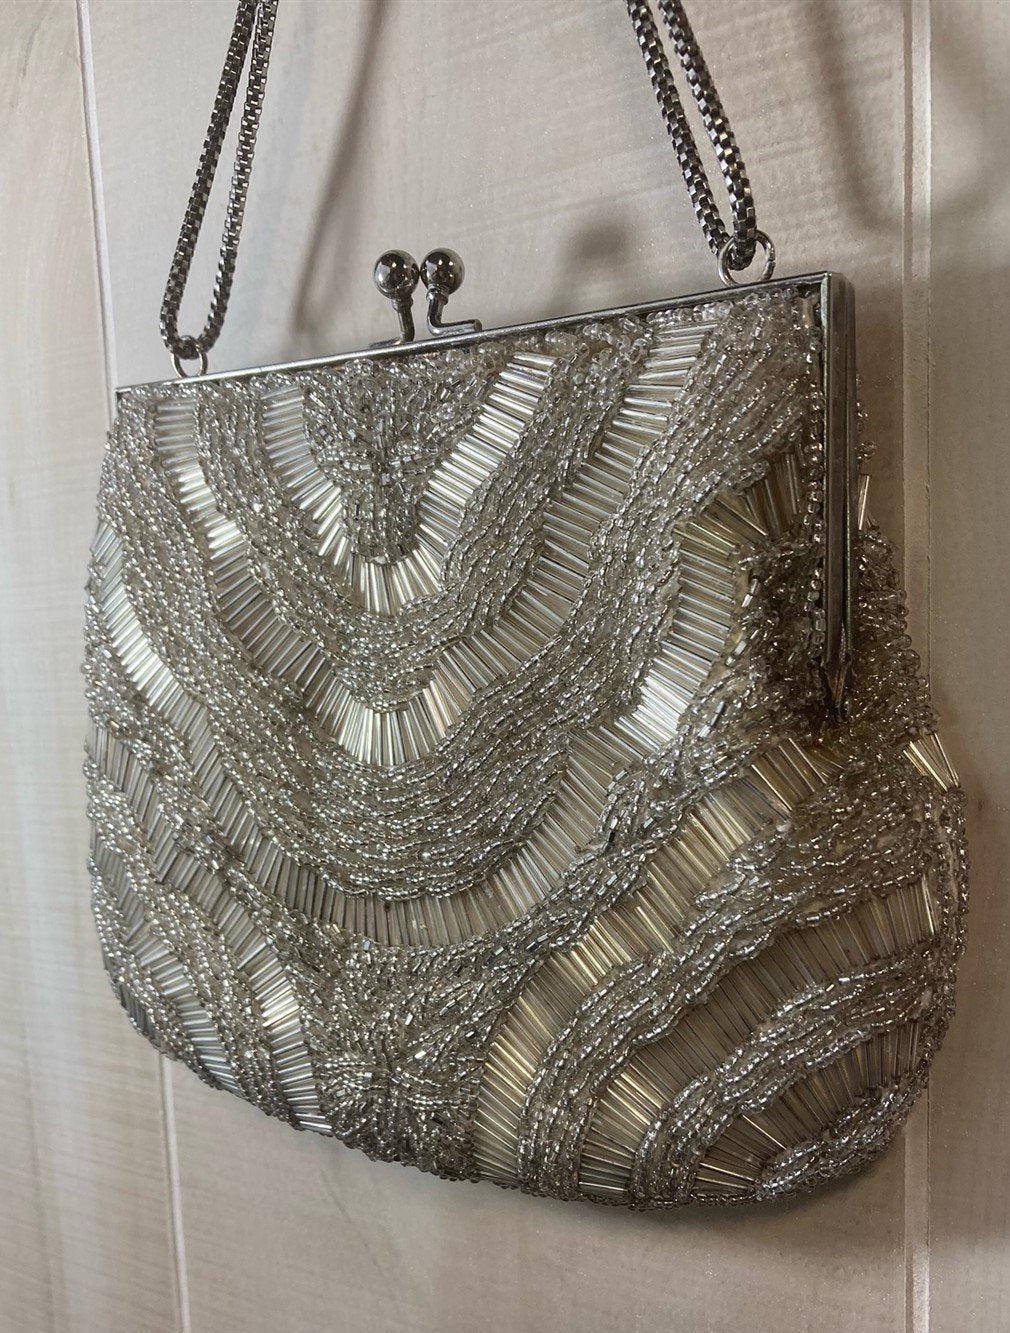 Vintage Small Silver Beaded Clutch Evening Hand Bag Purse